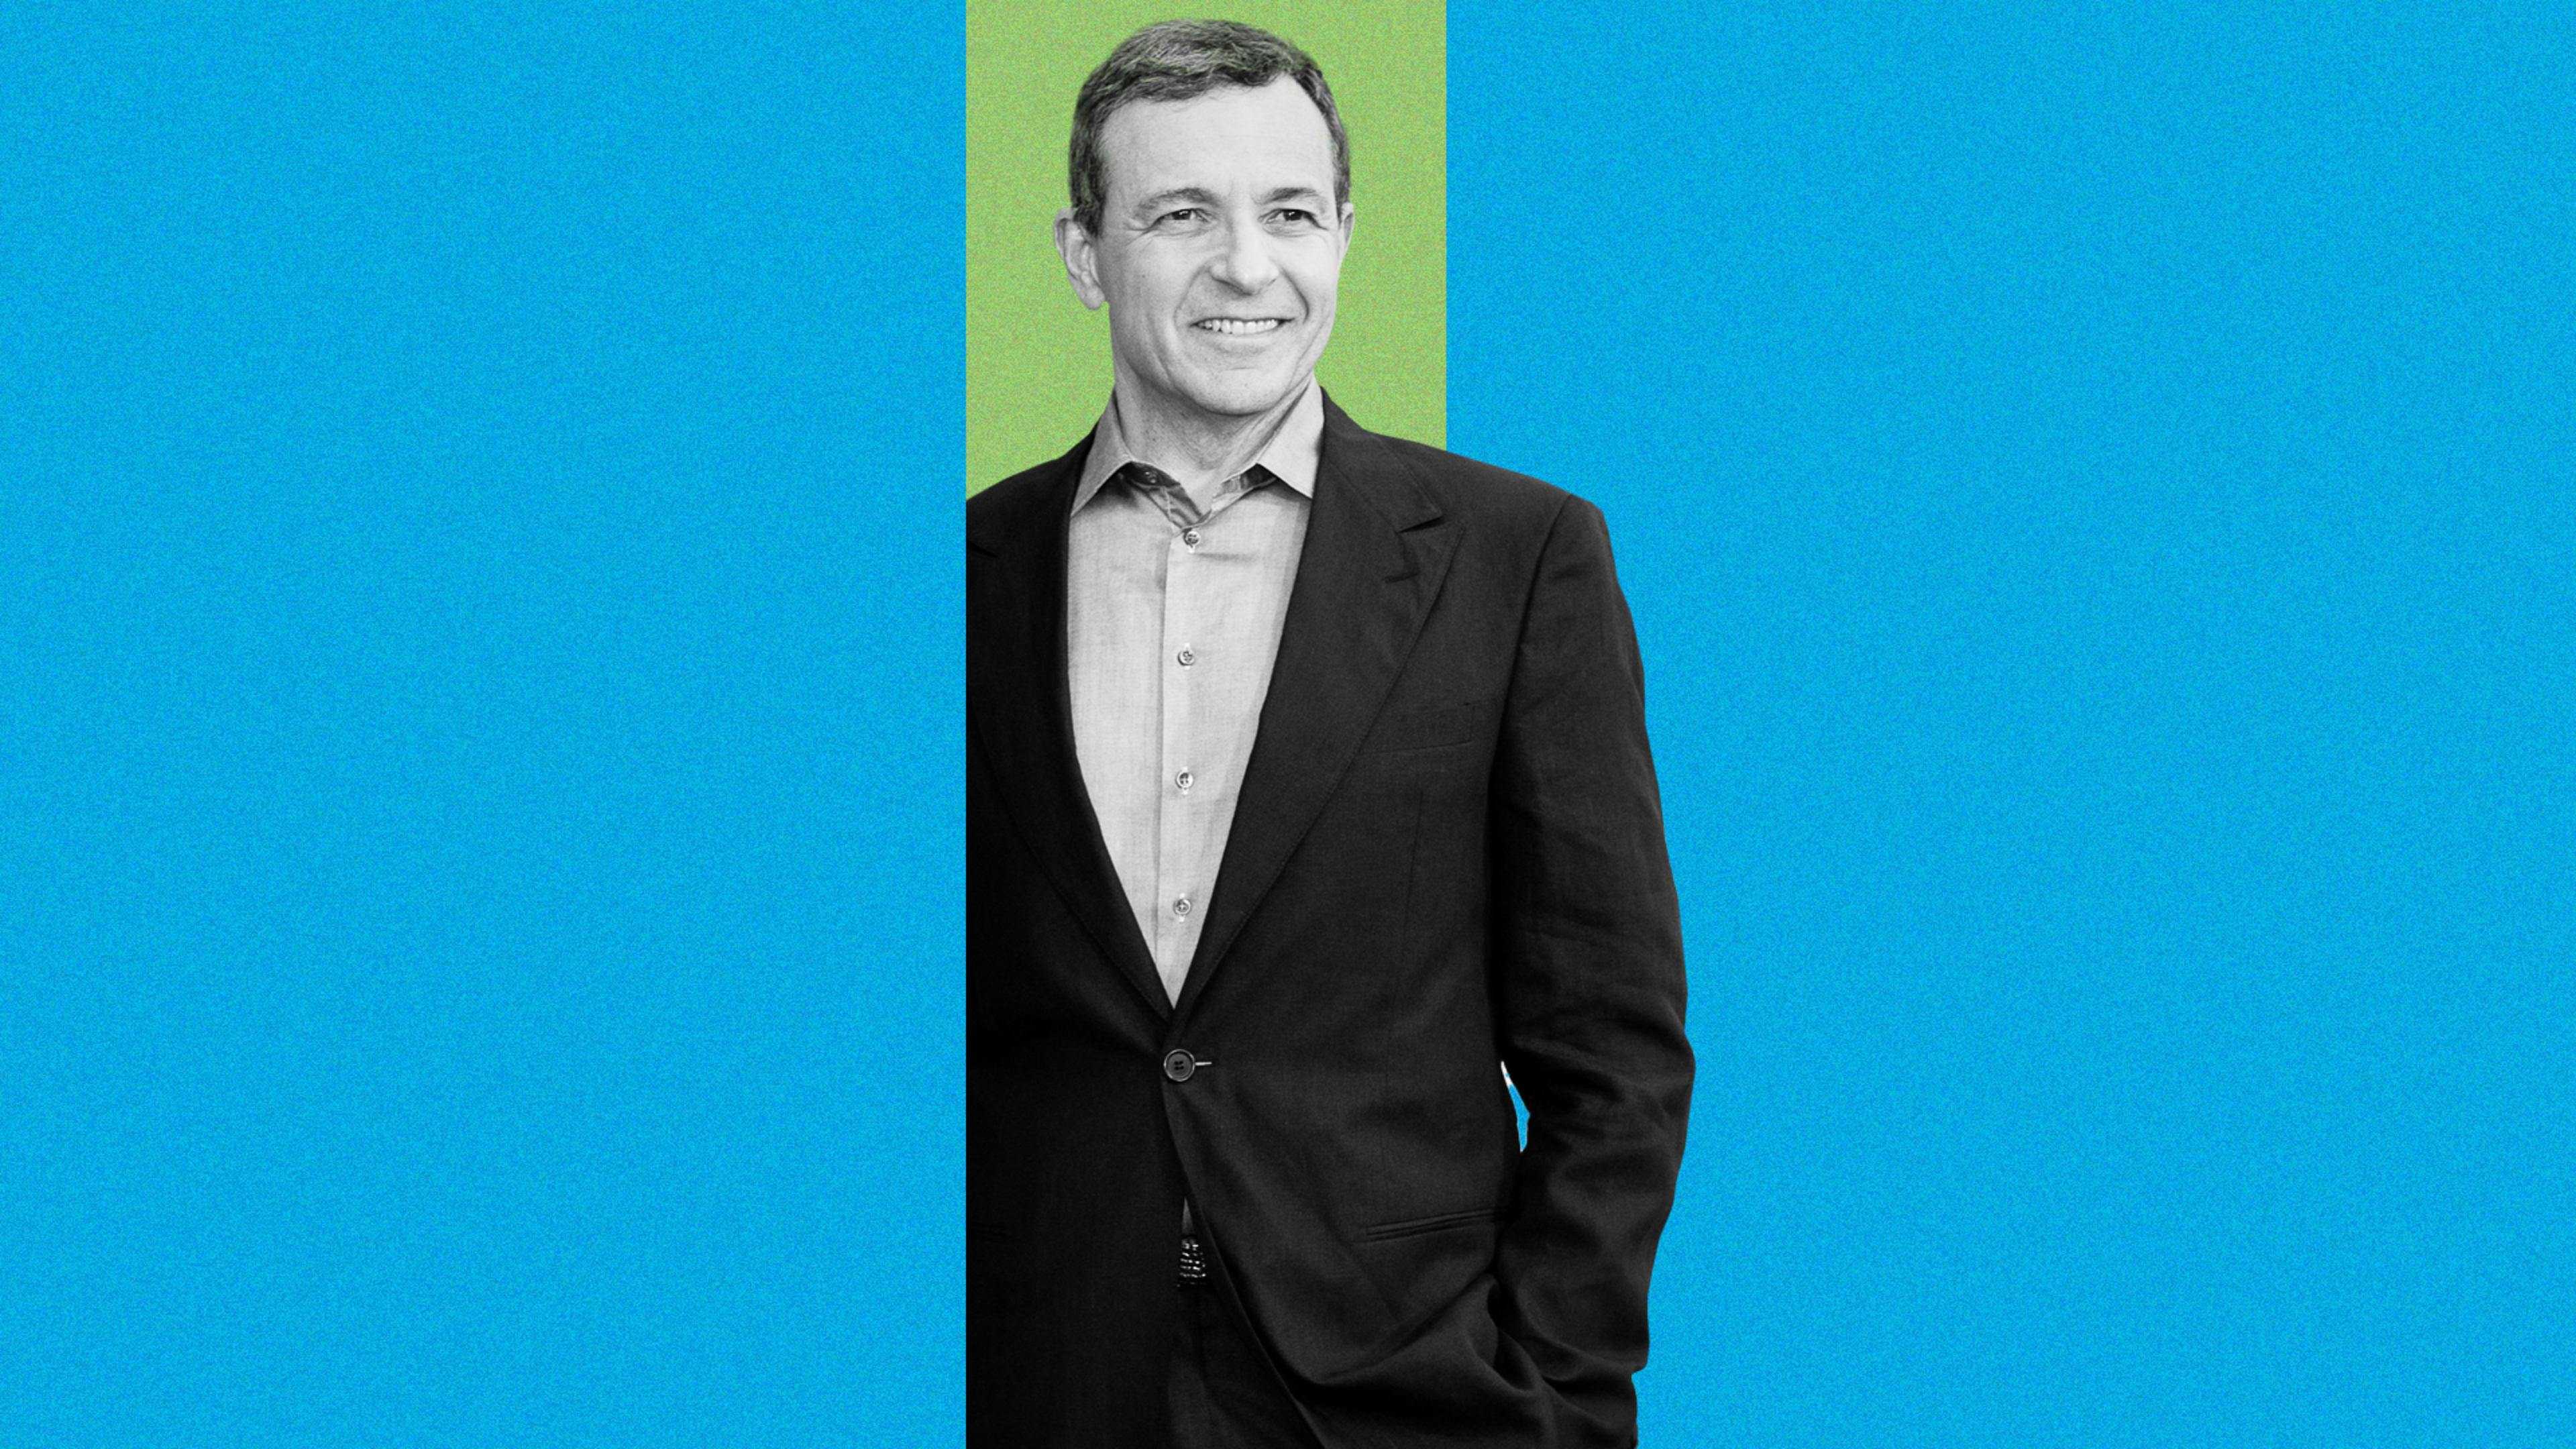 Despite Abigail Disney’s criticism, Bob Iger still seems fine with his giant pay package